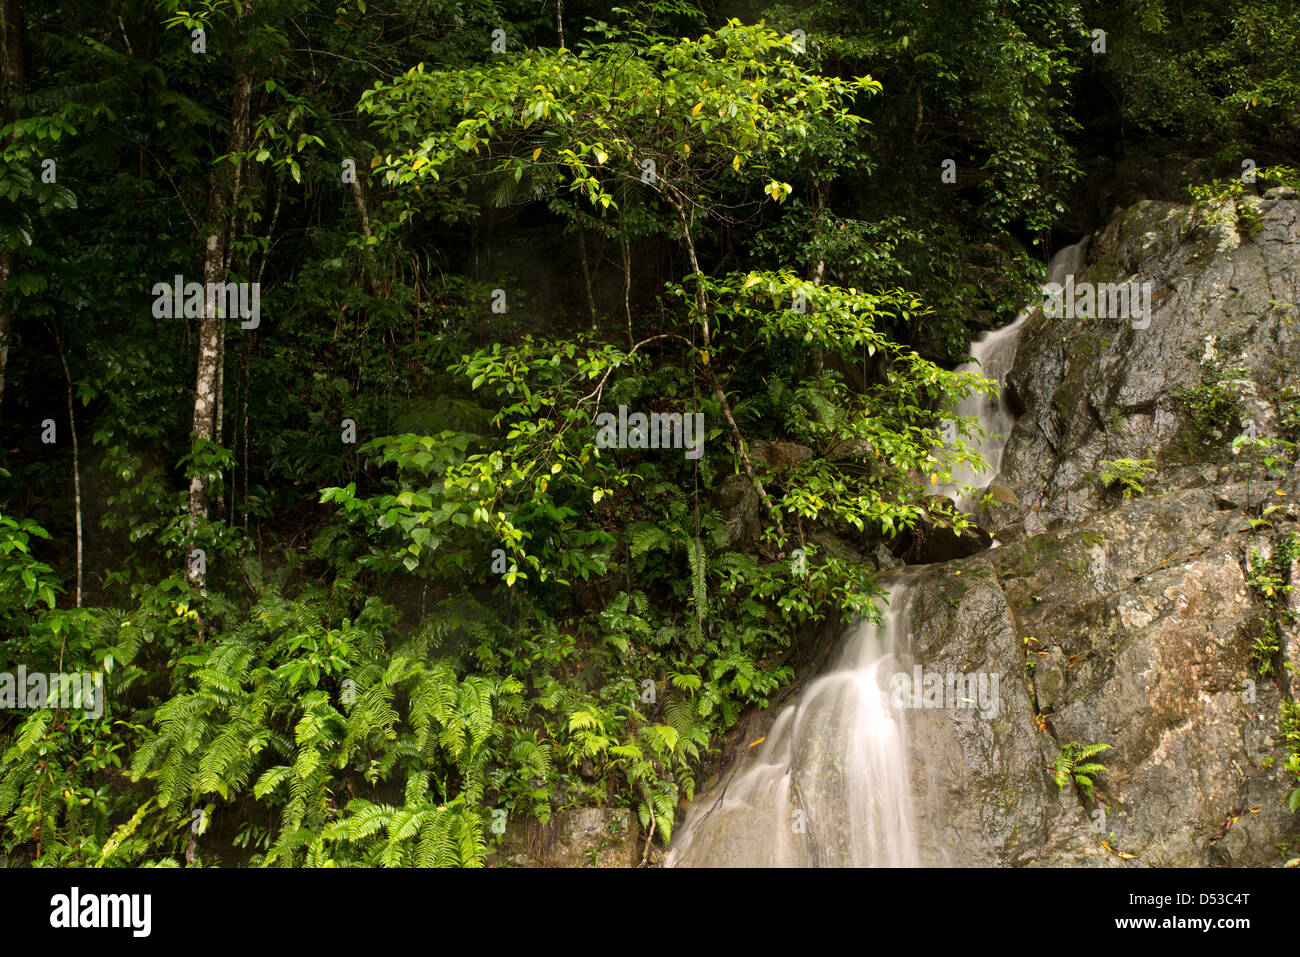 Rainforest with waterfall in the Barron Gorge near Cairns, Far North Queensland, Australia Stock Photo